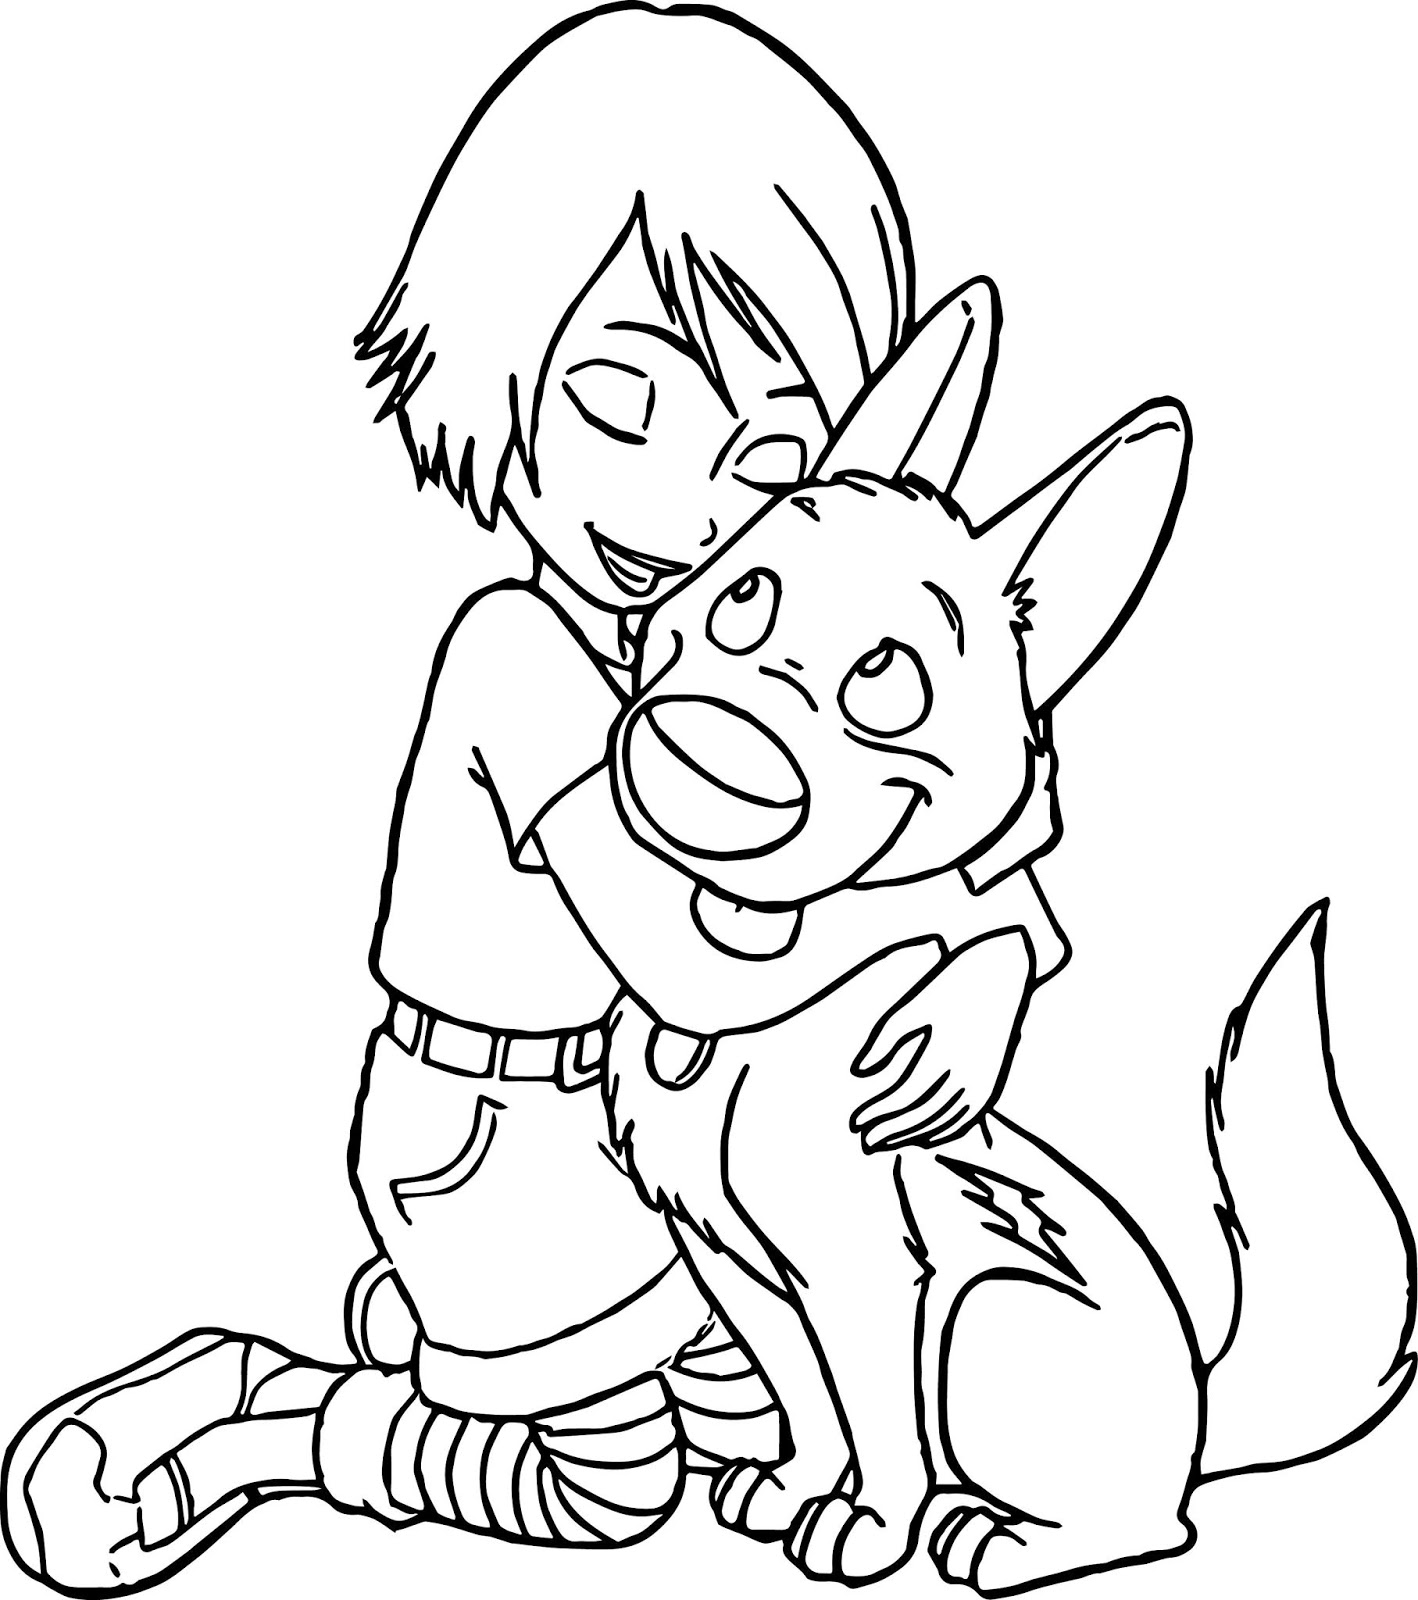 Bolt Coloring Pages for Kids - colours drawing wallpaper